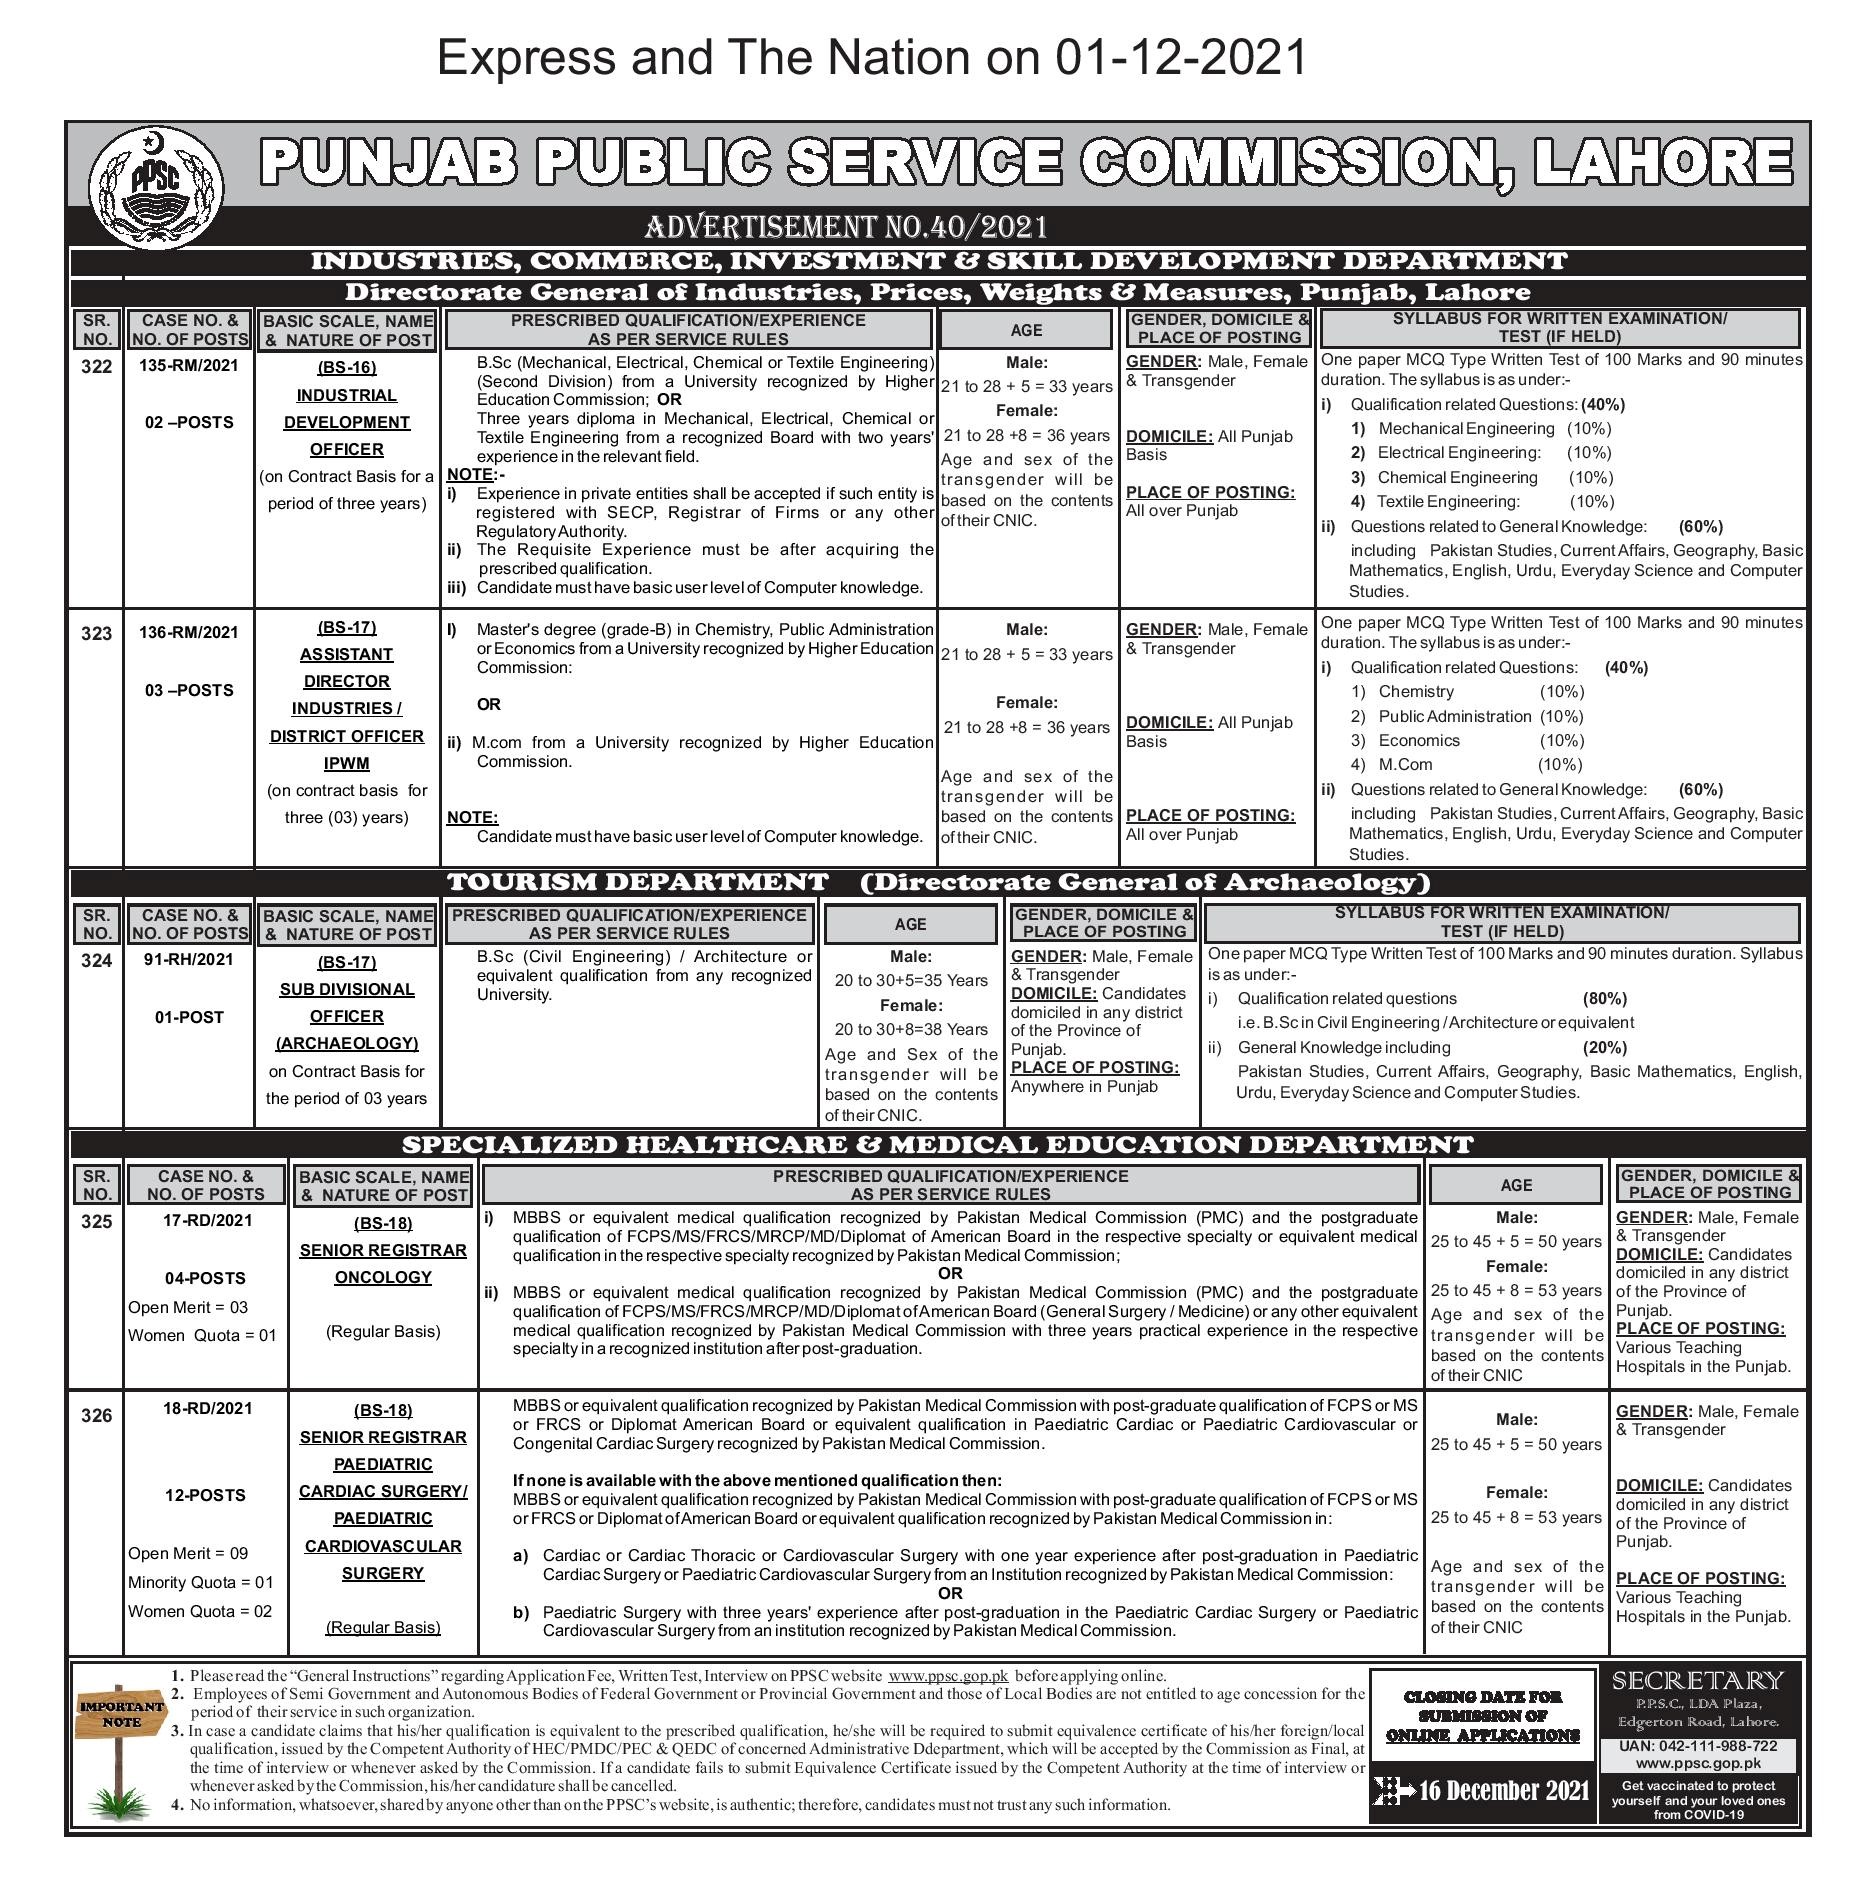 PPSC Jobs 2021 All Current Advertisements – Apply Online